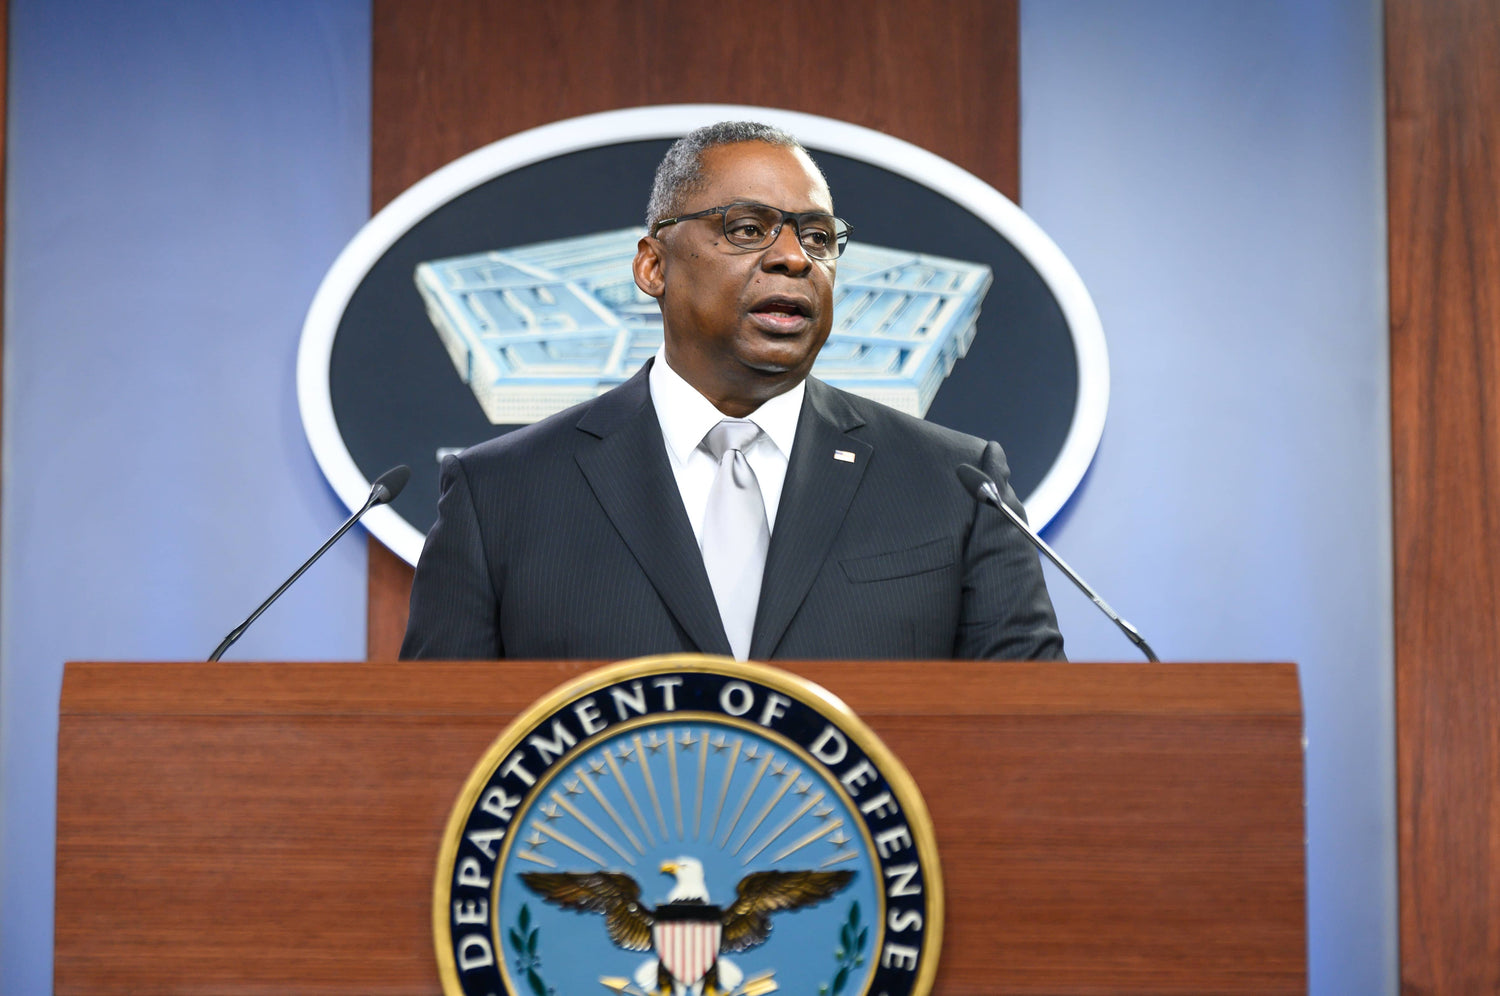 "Securing Stability in Crisis: Secretary Austin's Health and the Pentagon's Response"